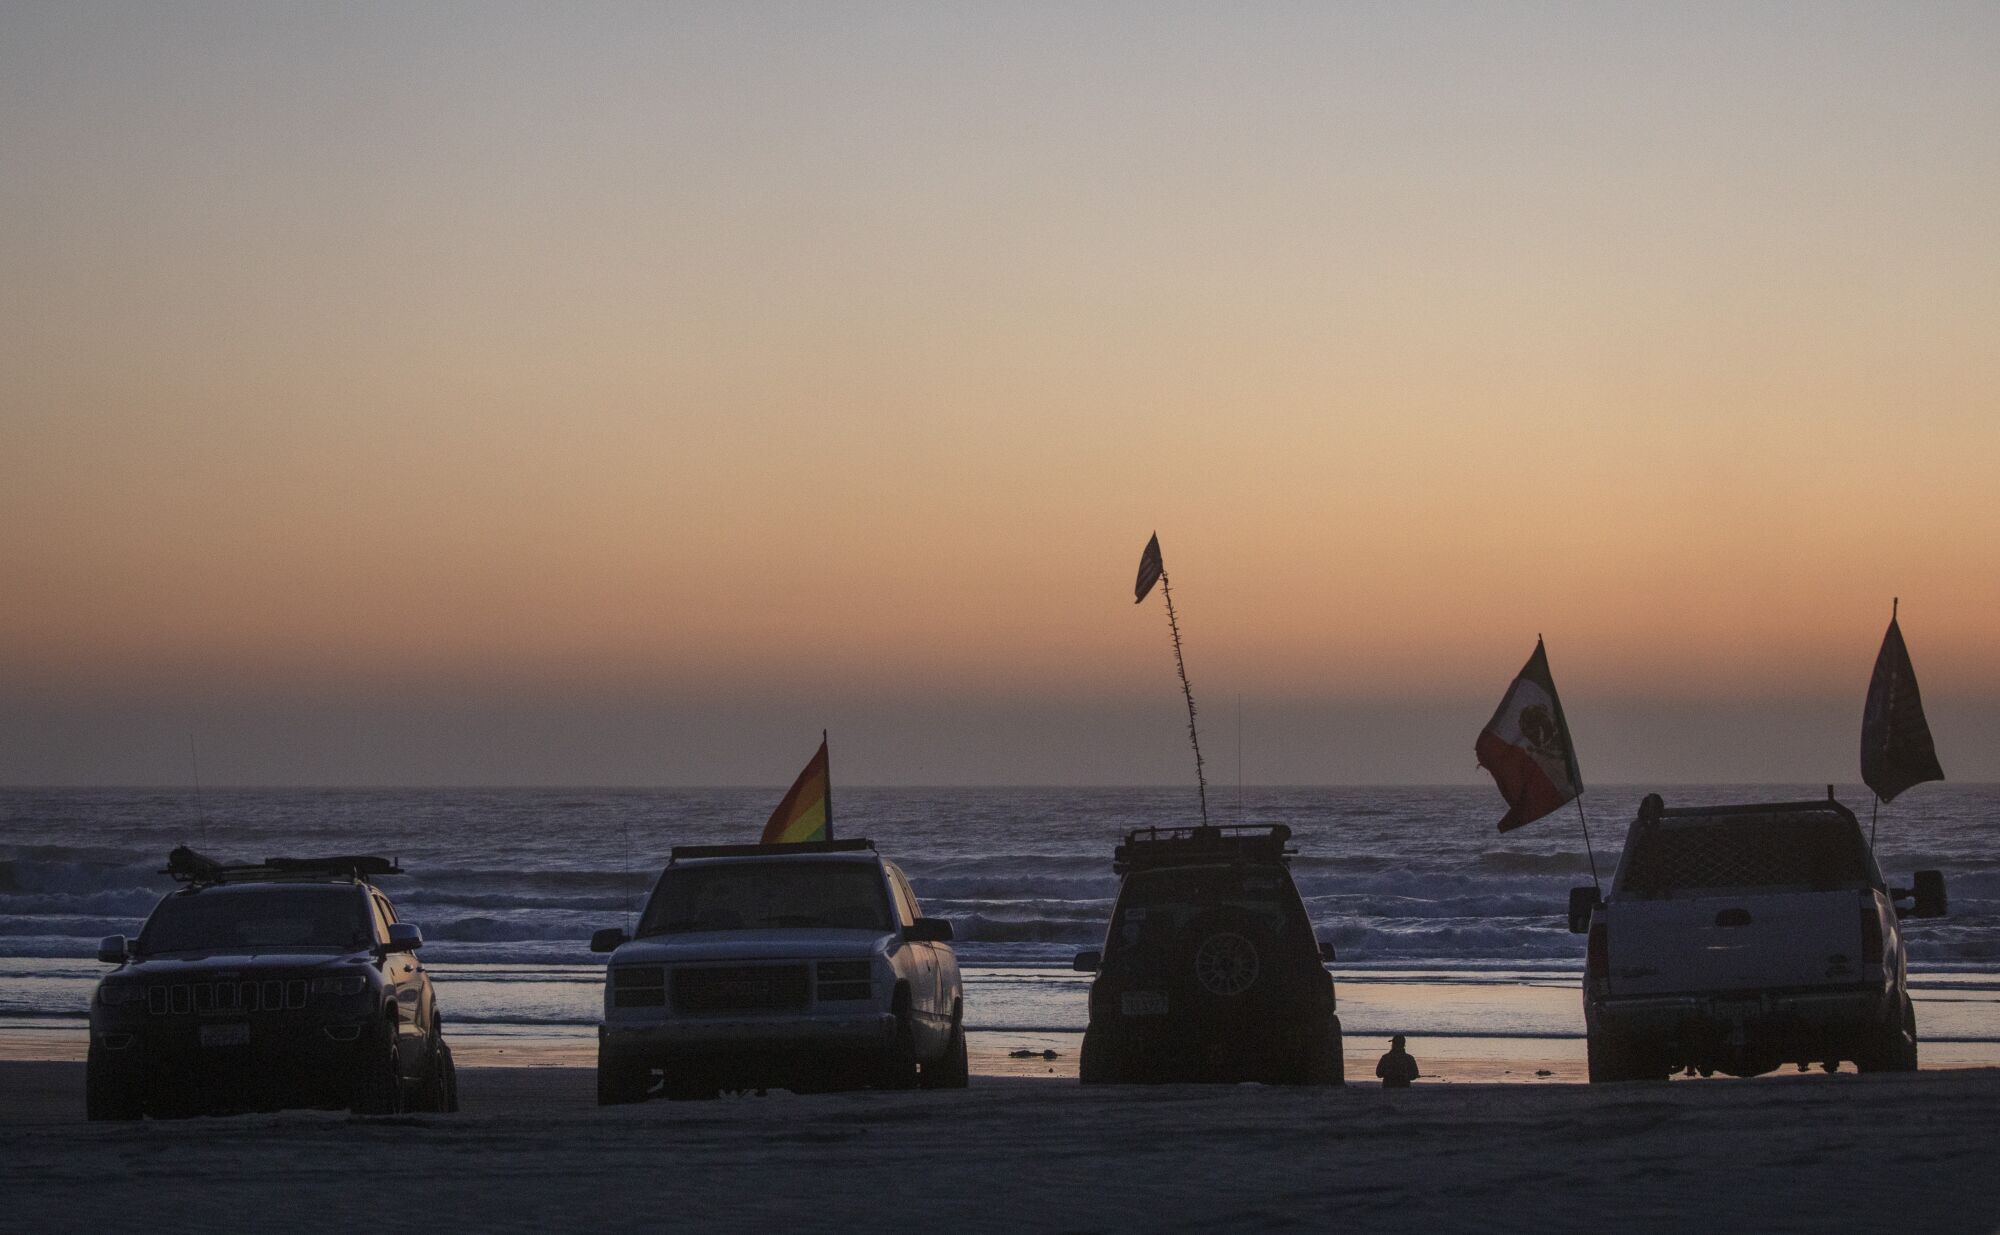 Trucks sporting flags parked on the beach with the ocean behind